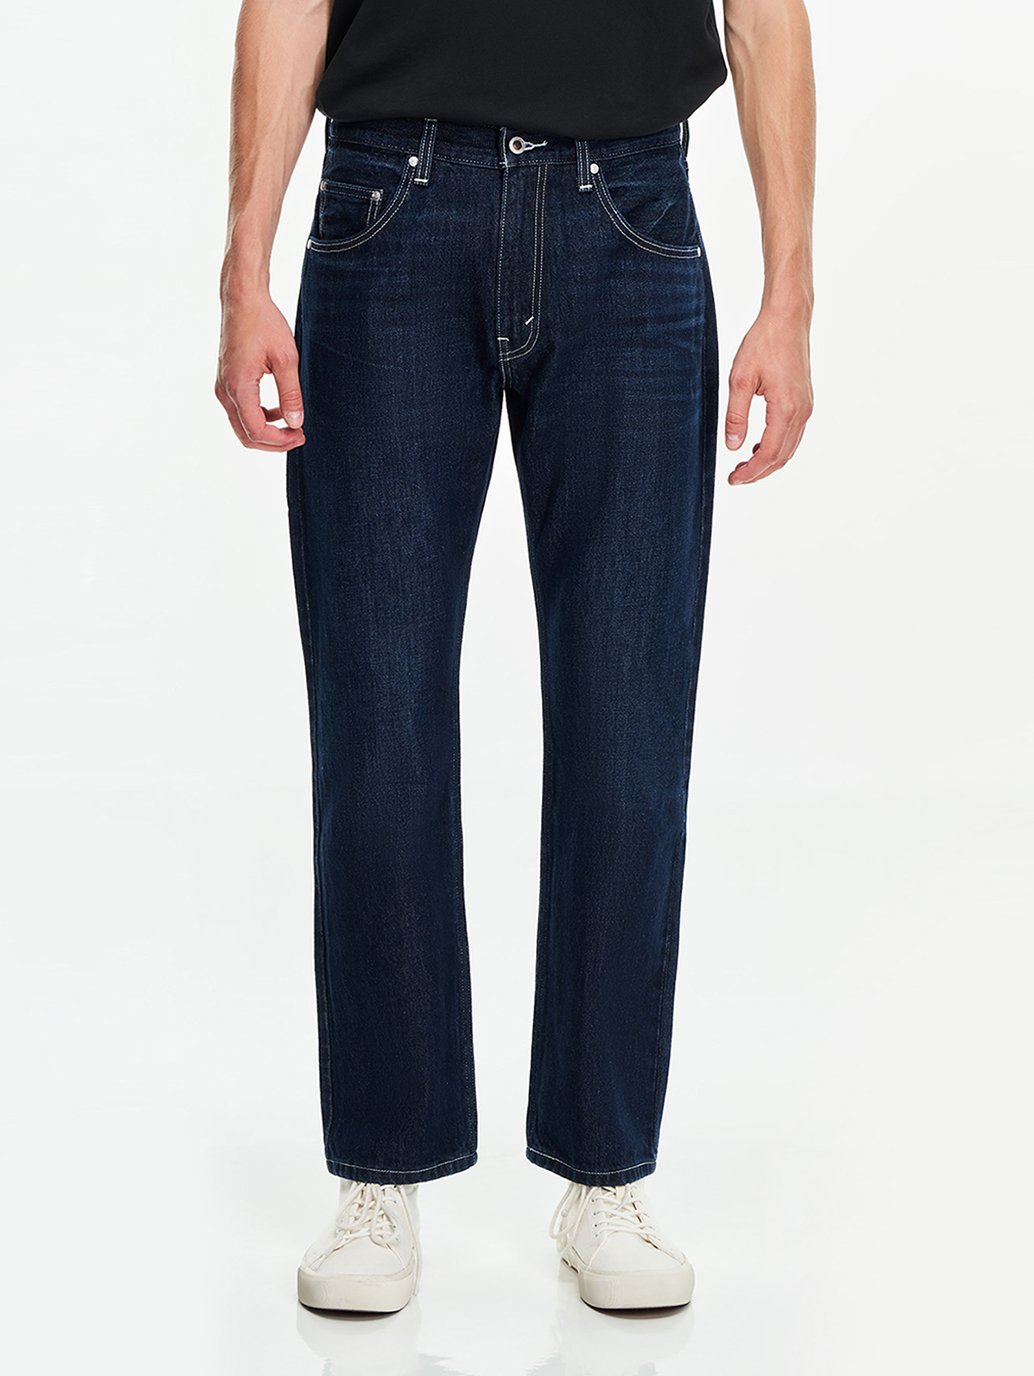 Buy Levi's® Men's SilverTab™ Straight Jeans | Levi’s® Official Online ...